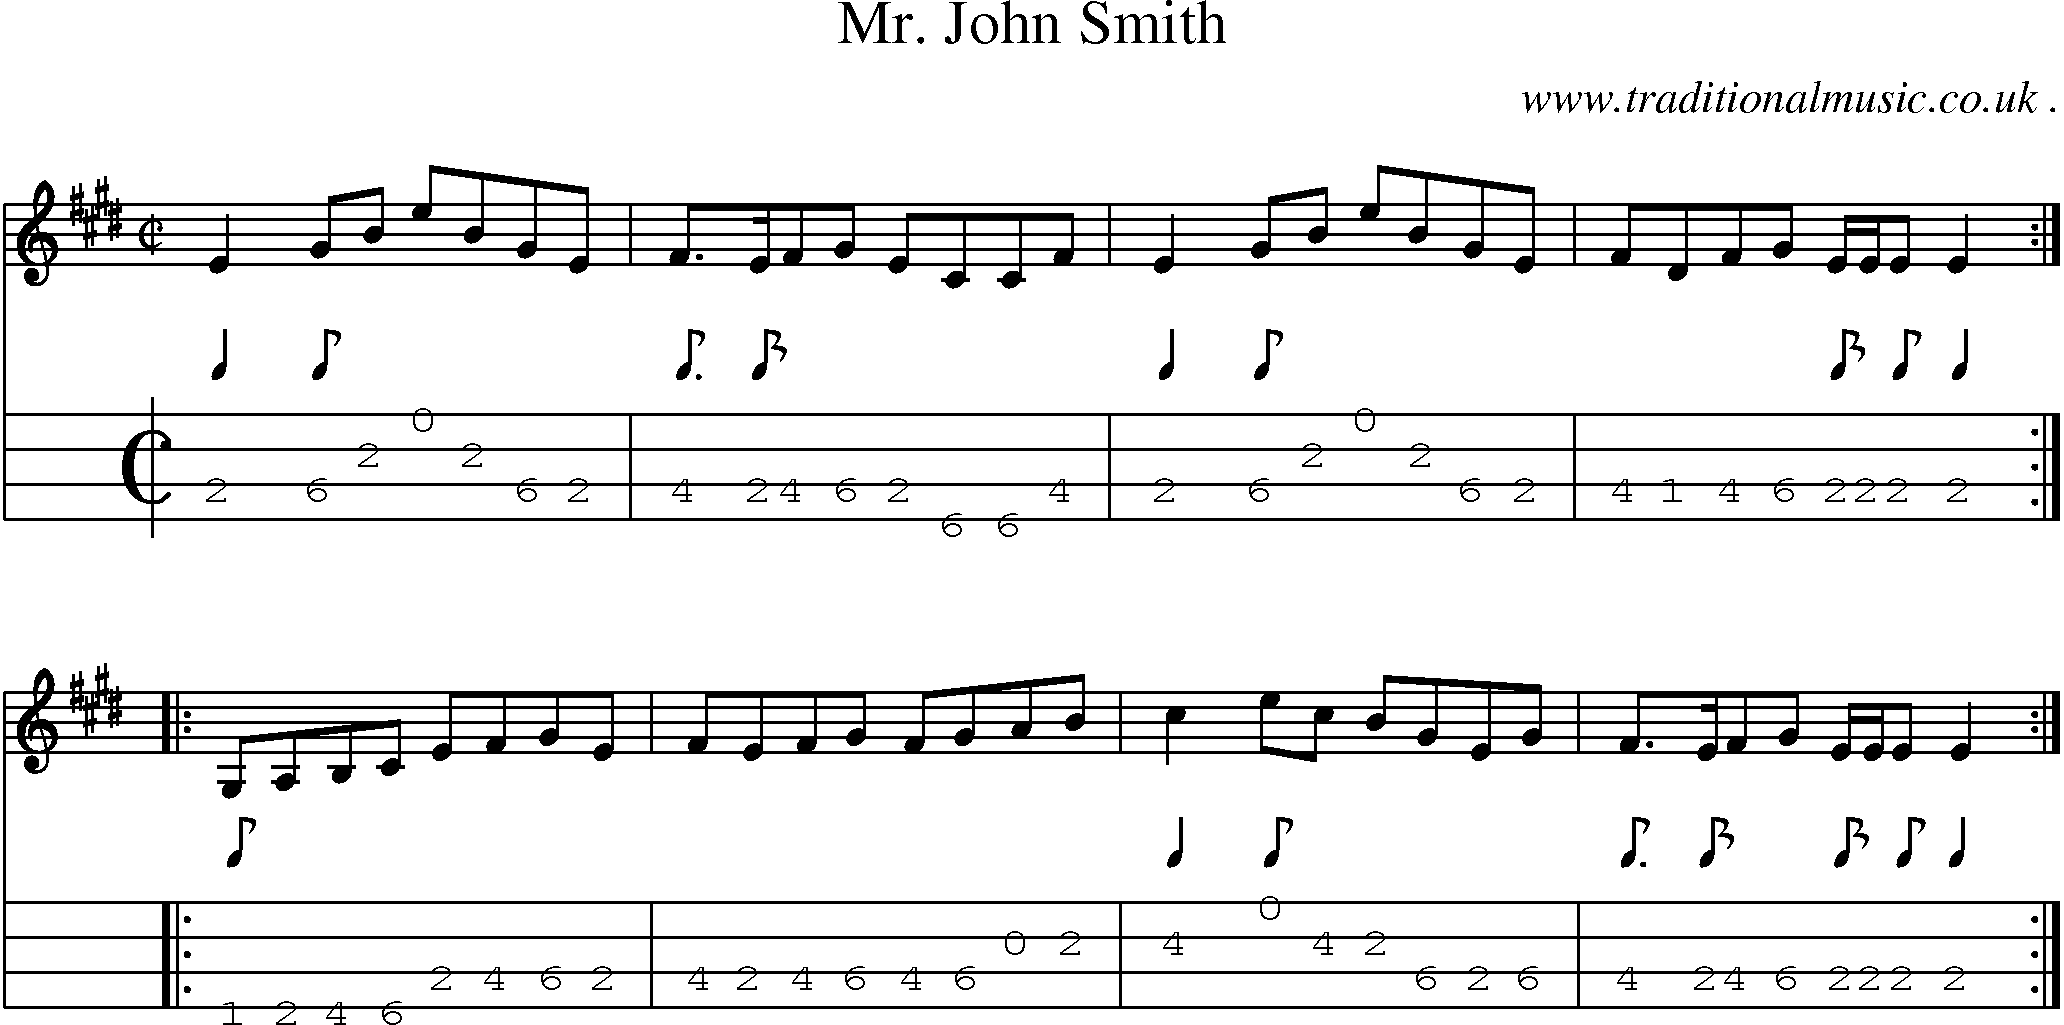 Sheet-music  score, Chords and Mandolin Tabs for Mr John Smith